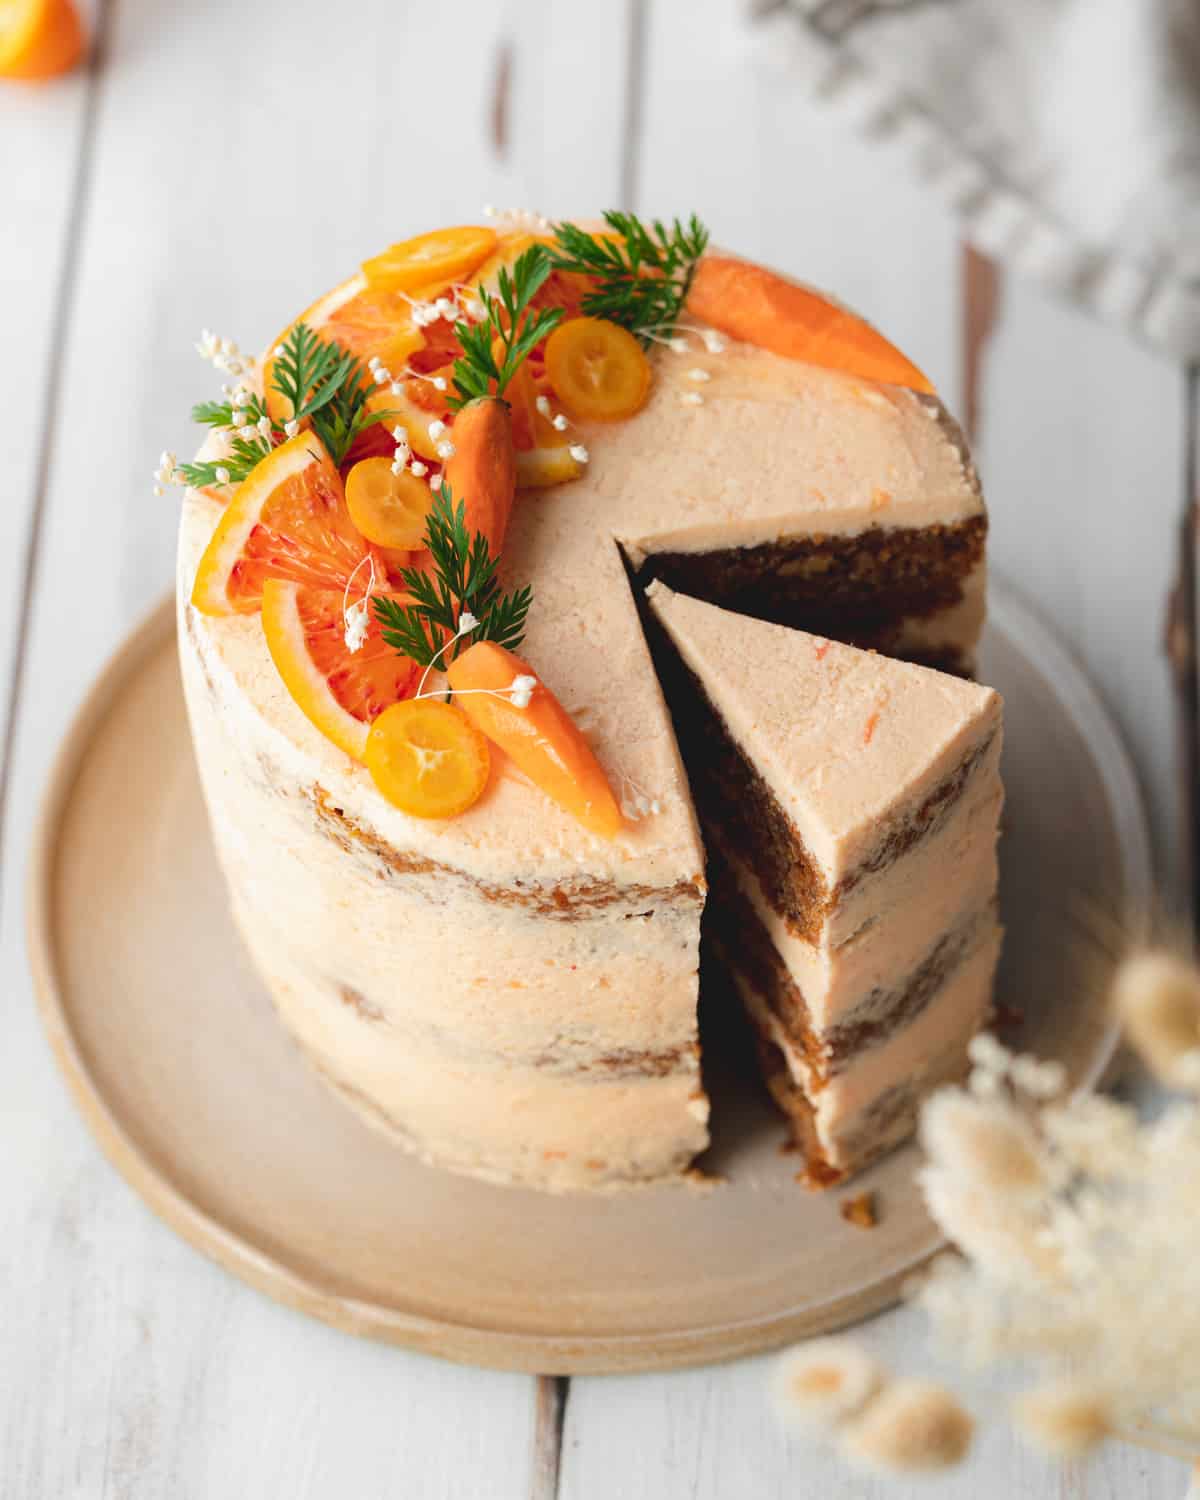 carrot cake with blood oranges and mini carrots on a white wooden surface.